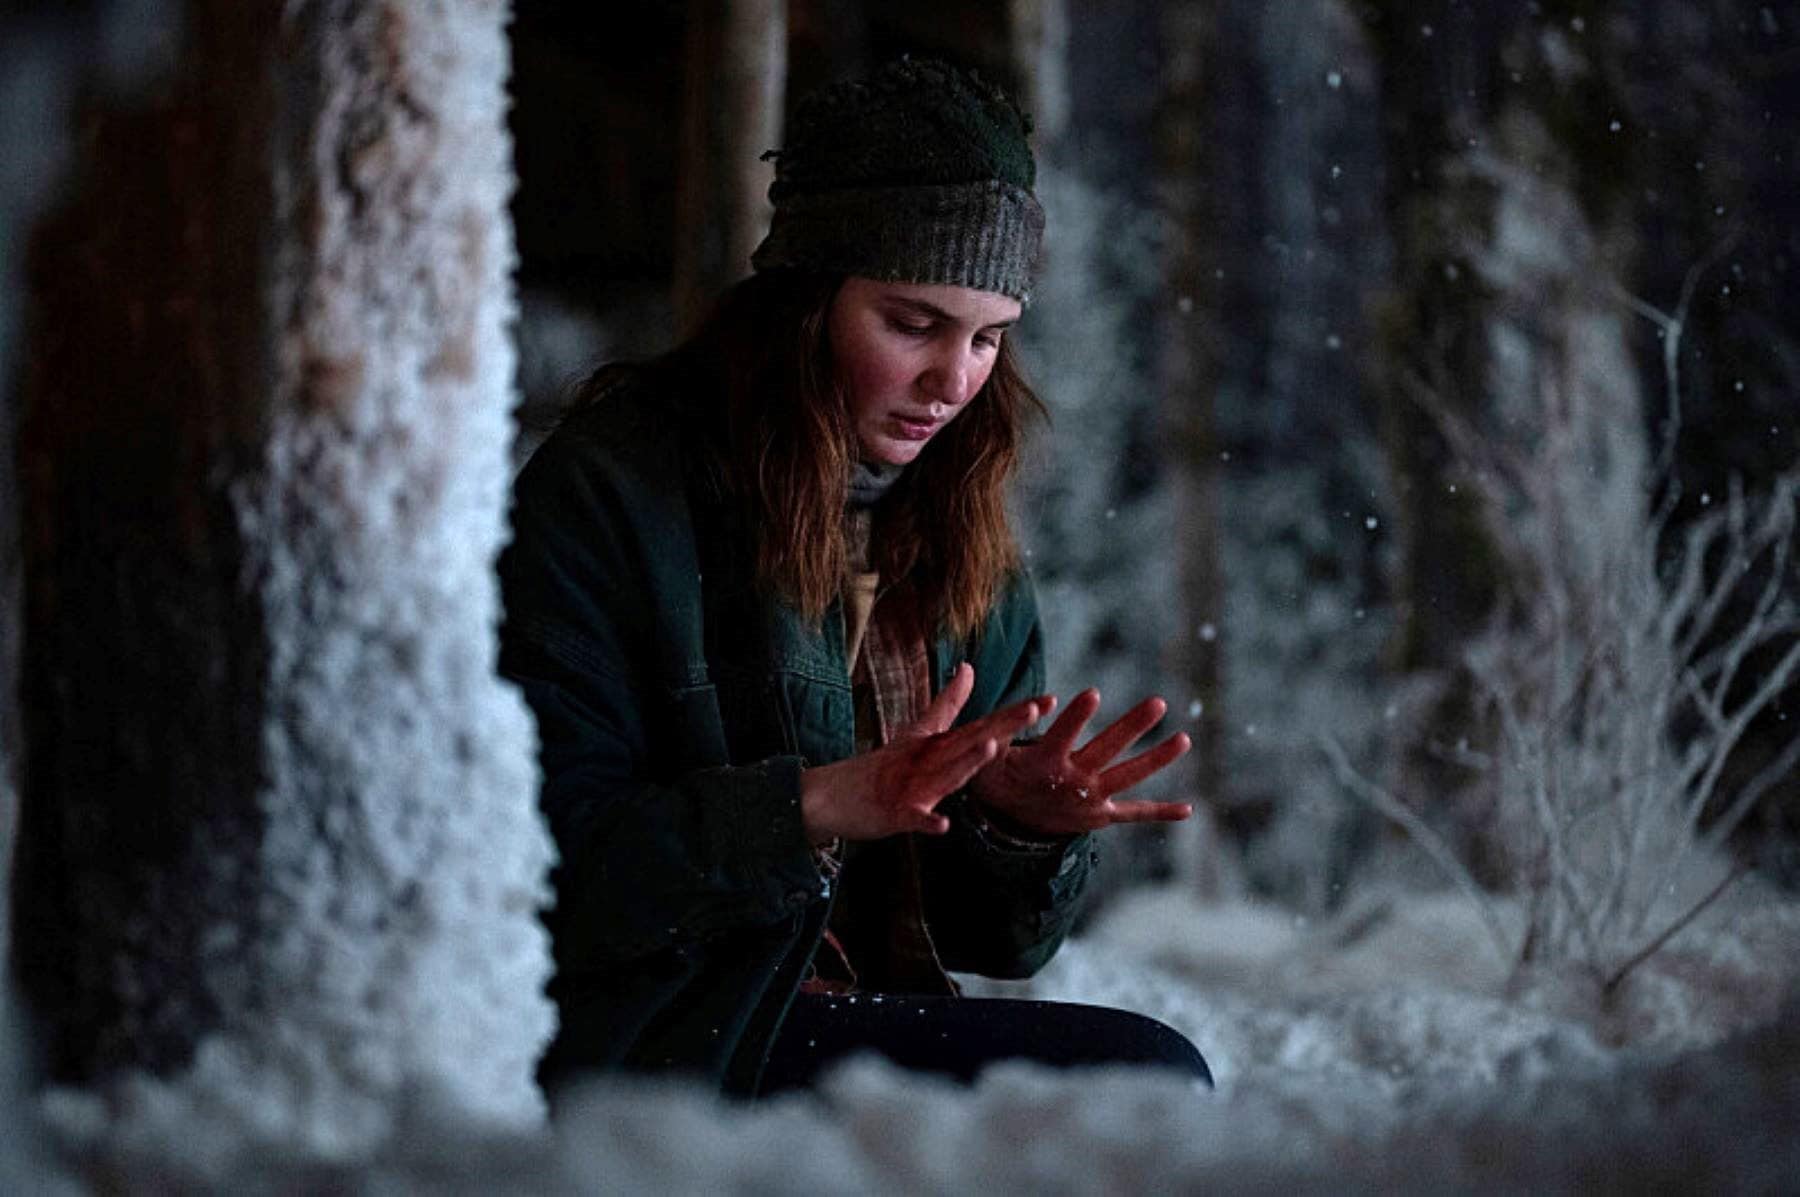 A woman examines her hands while kneeling in the snow in this photo by Showtime.